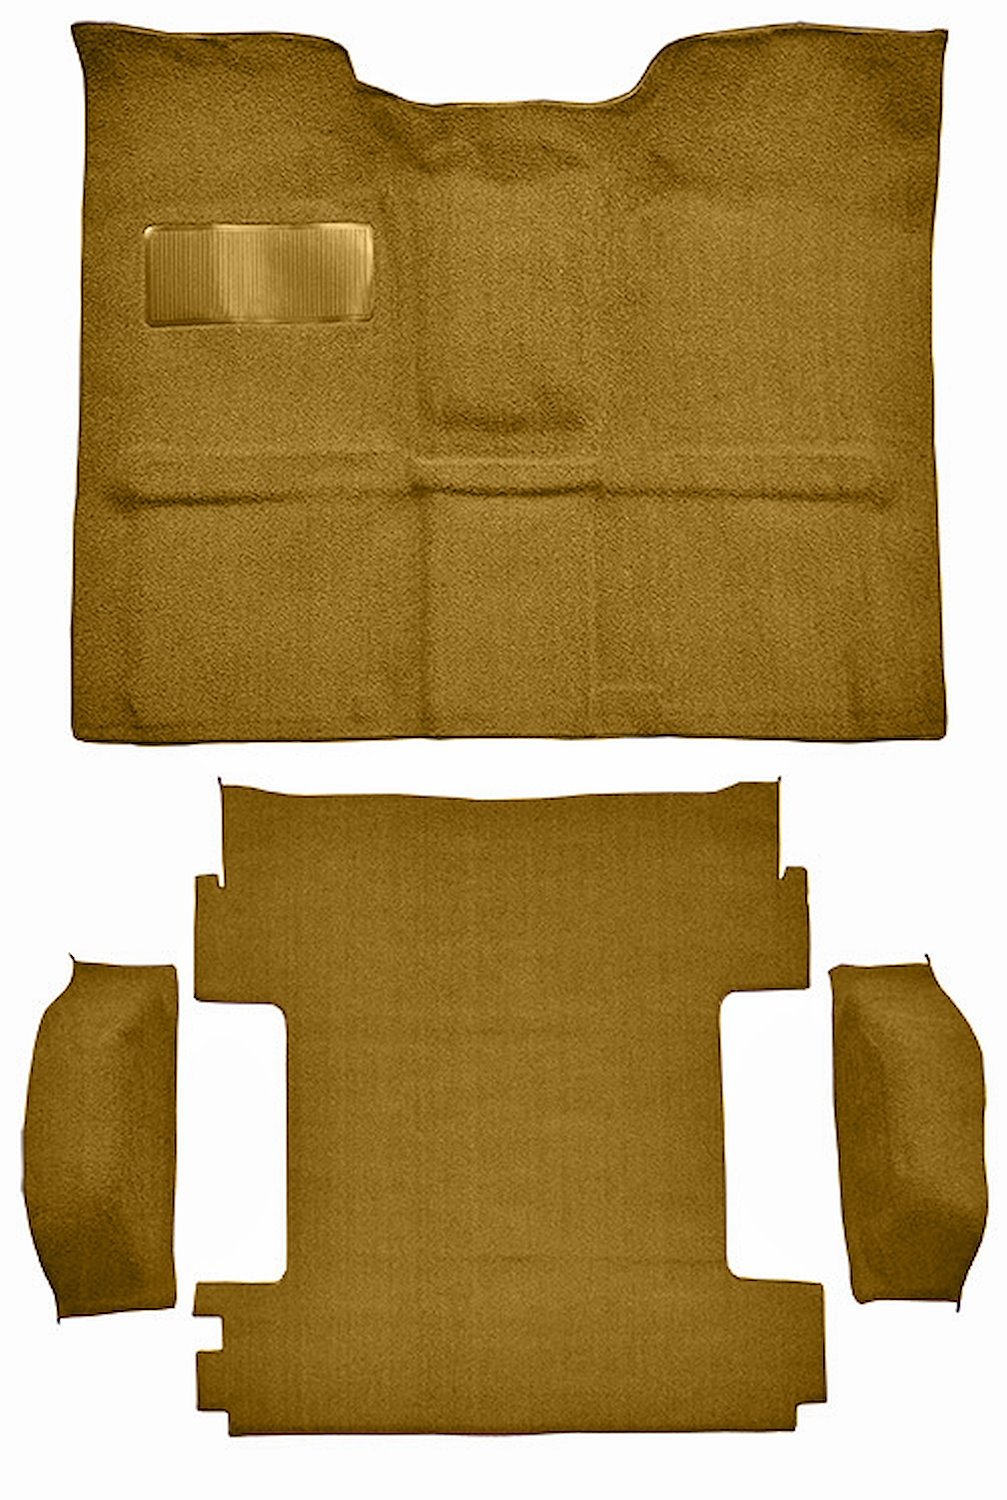 Molded Loop Carpet for 1969-1972 Chevrolet Blazer, 1970-1972 GMC Jimmy [Mass Backing, 4-Piece, Gold]